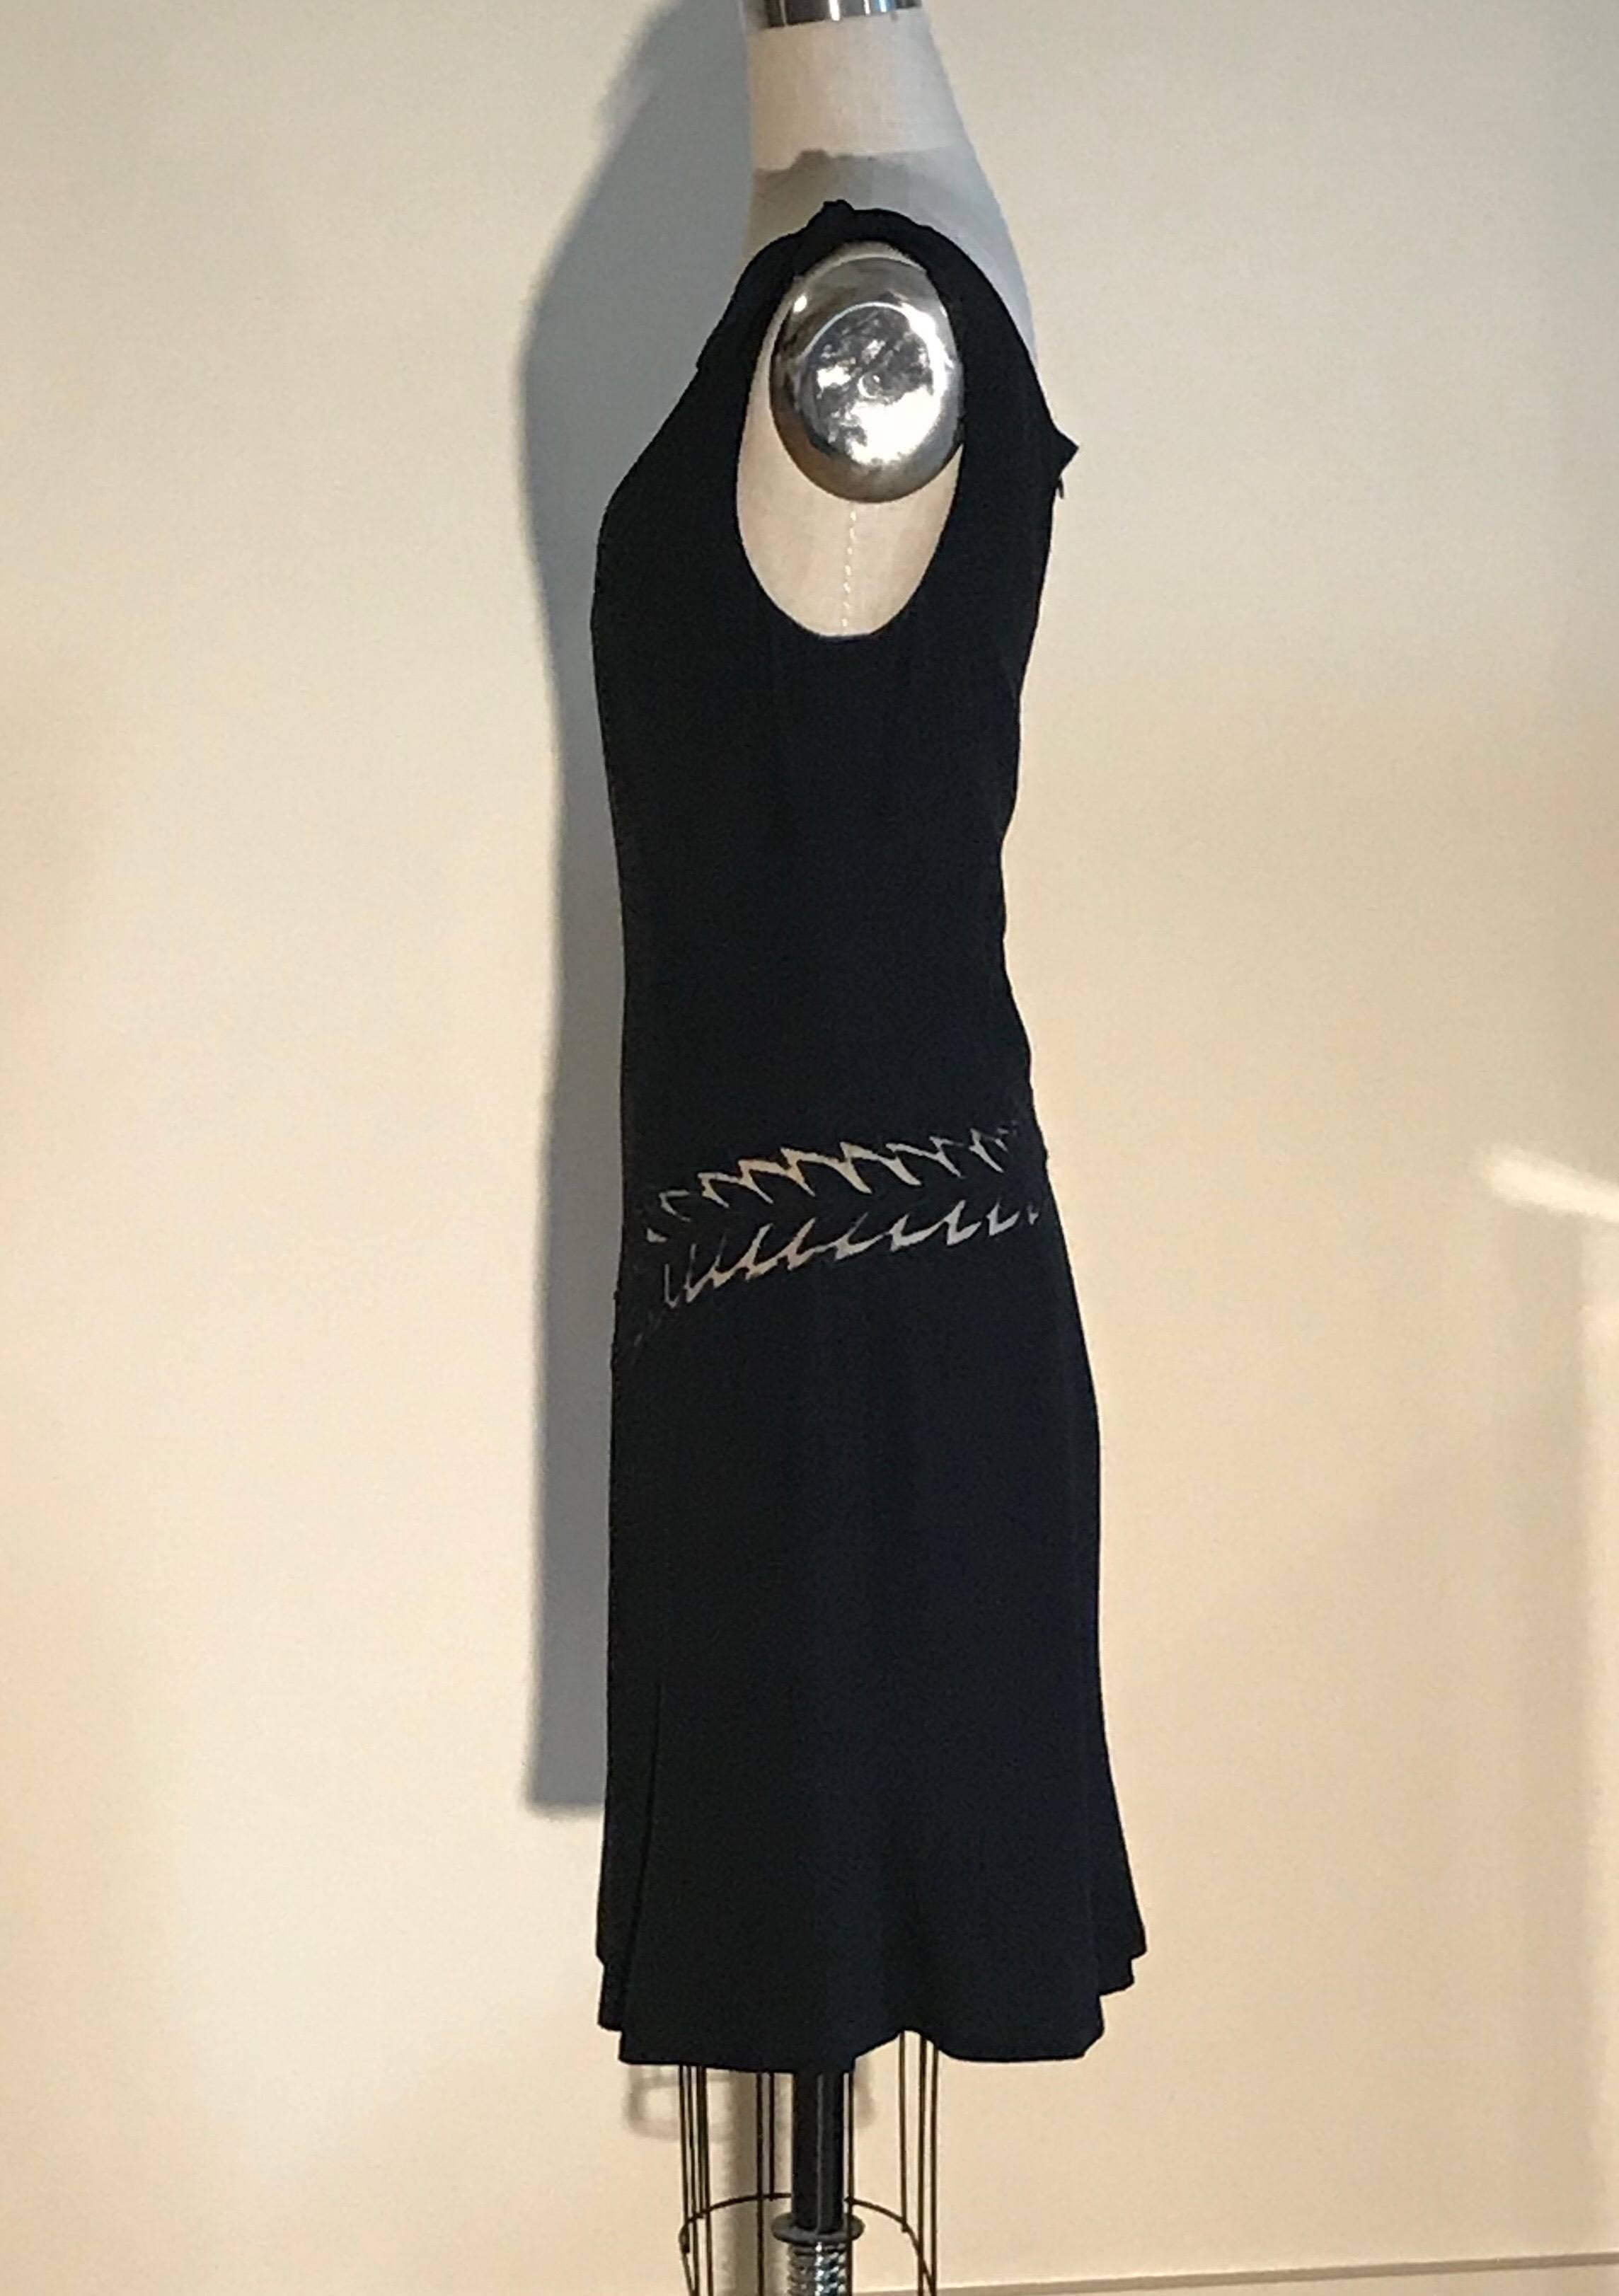 Black Alexander McQueen dress featuring cut out insets that look like feathers or ferns. Decorative ties at shoulders. Back zip.

50% acetate, 50% rayon. 
Fully lined in acetate/nylon.

Made in Italy.

Size IT 44, approximately US 8. See